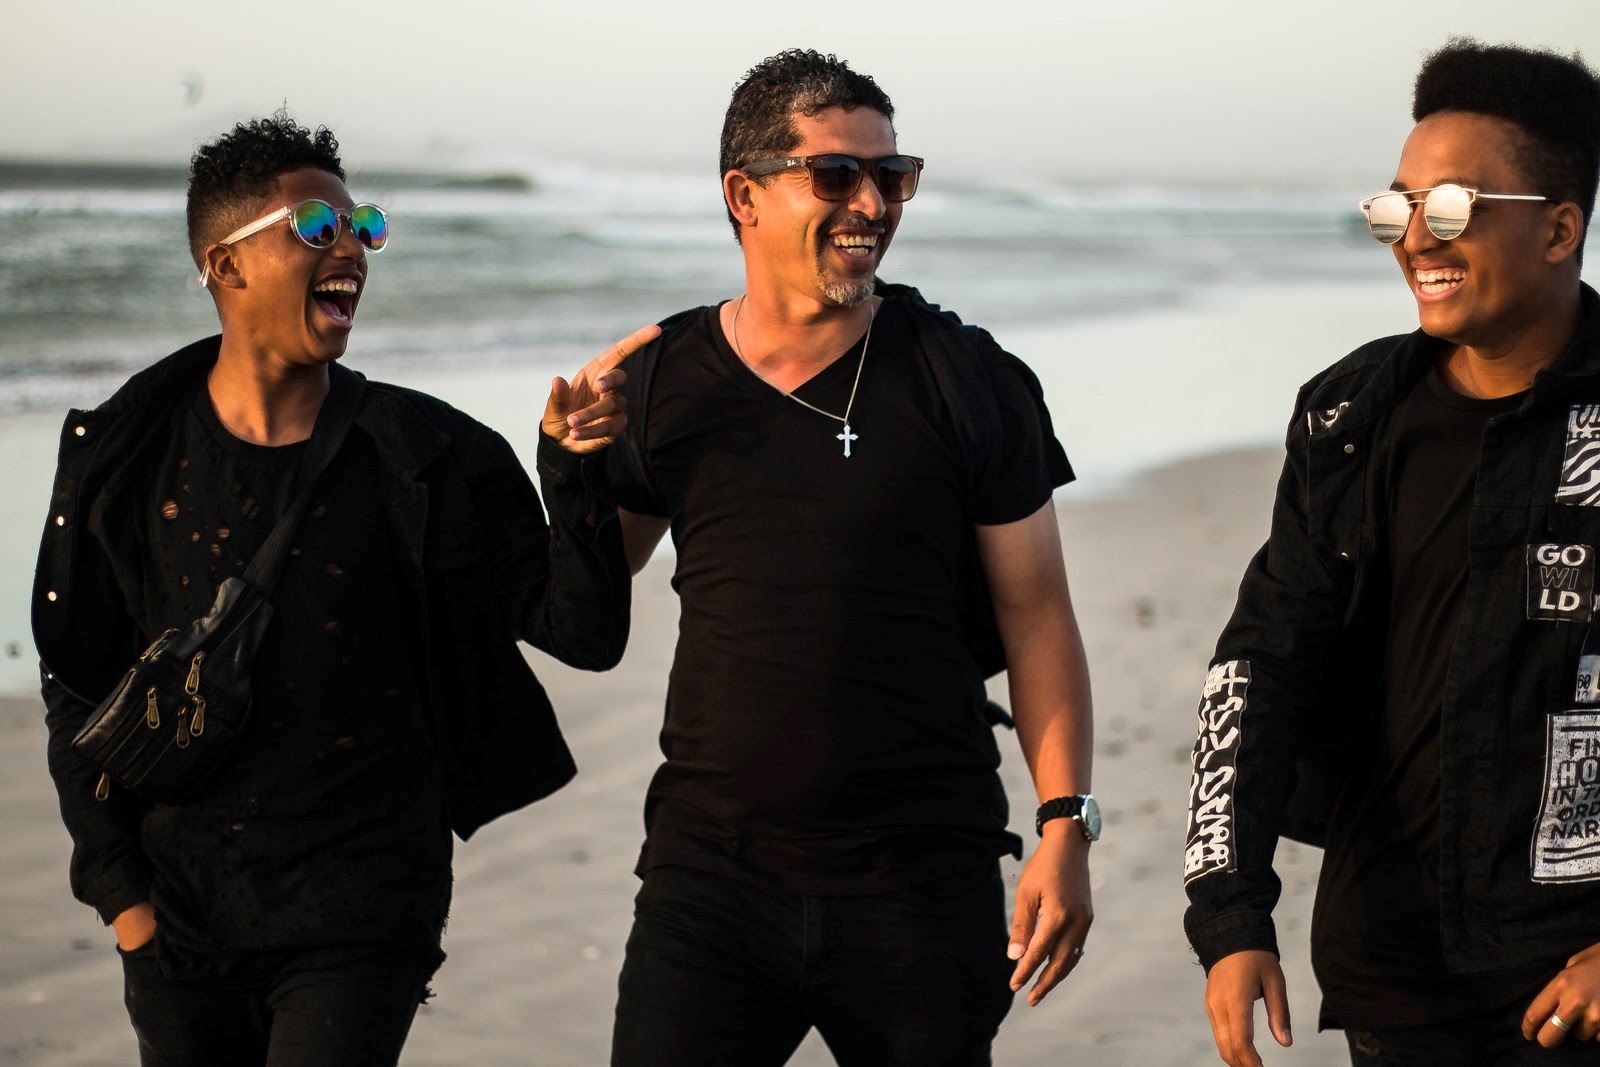 3 young lads on a beach laughing